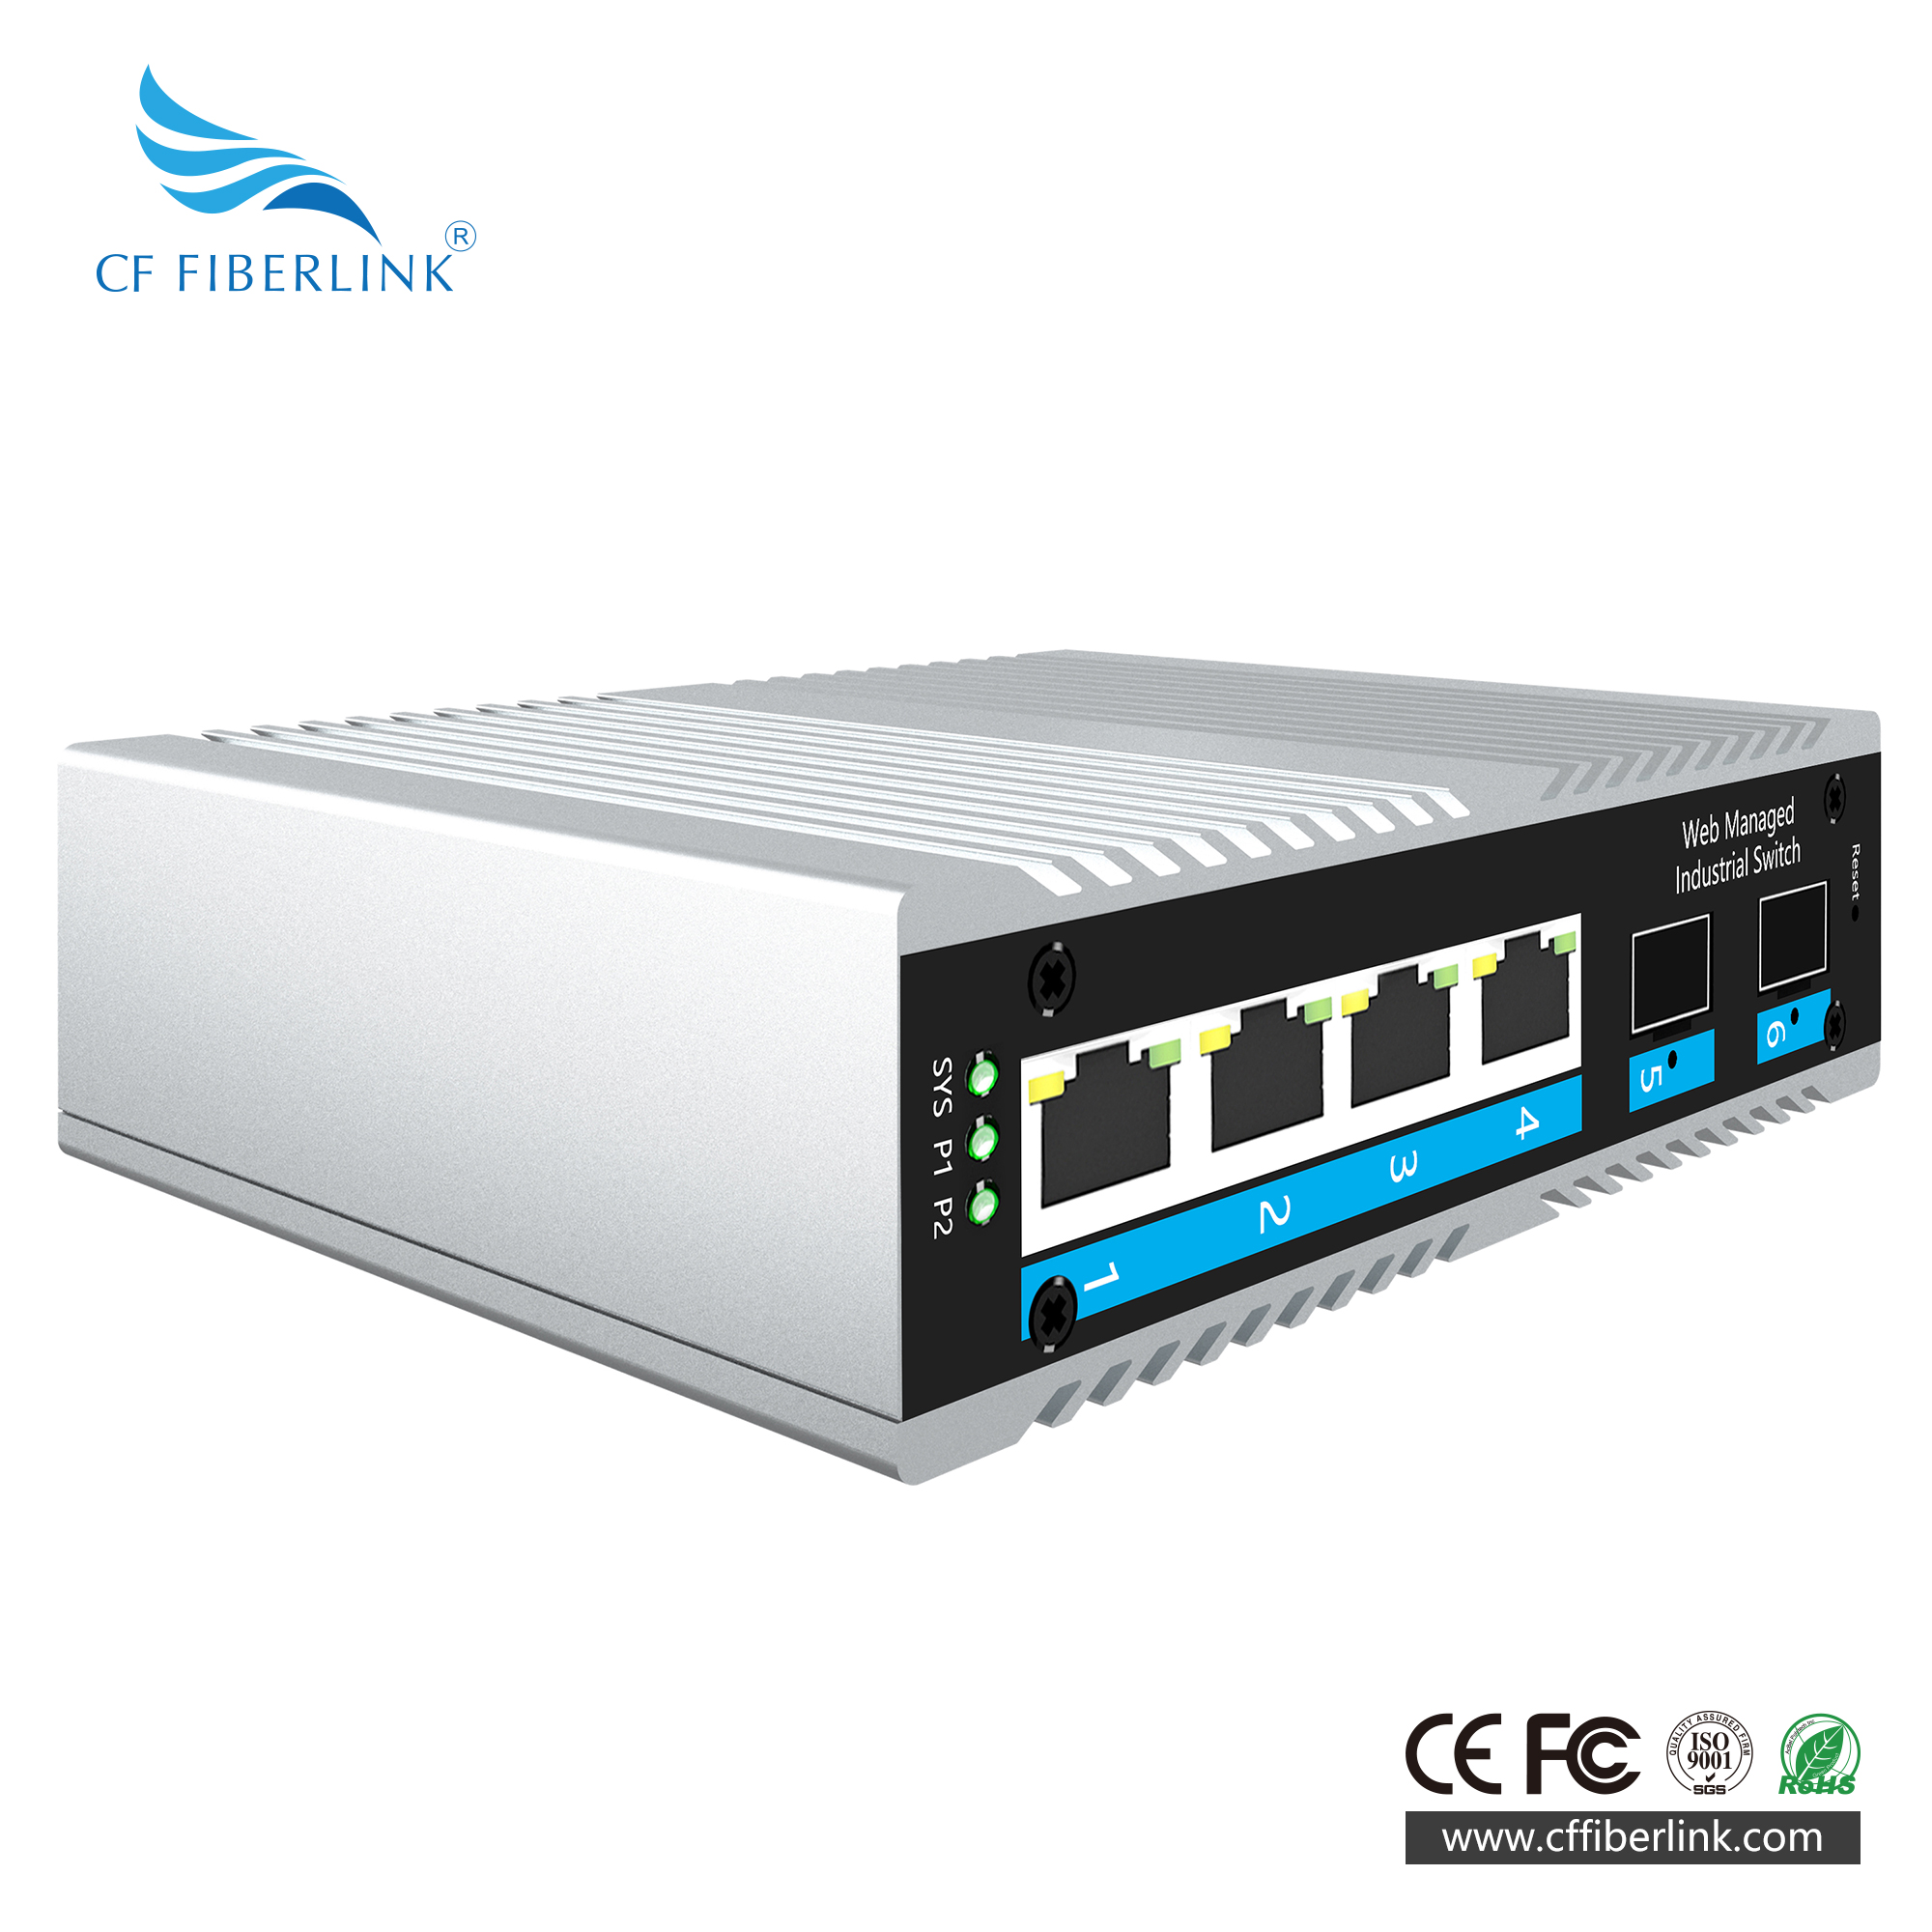 6-port 10/100M/1000M L2 WEB Managed Industrial Ethernet Switch with SFP interface